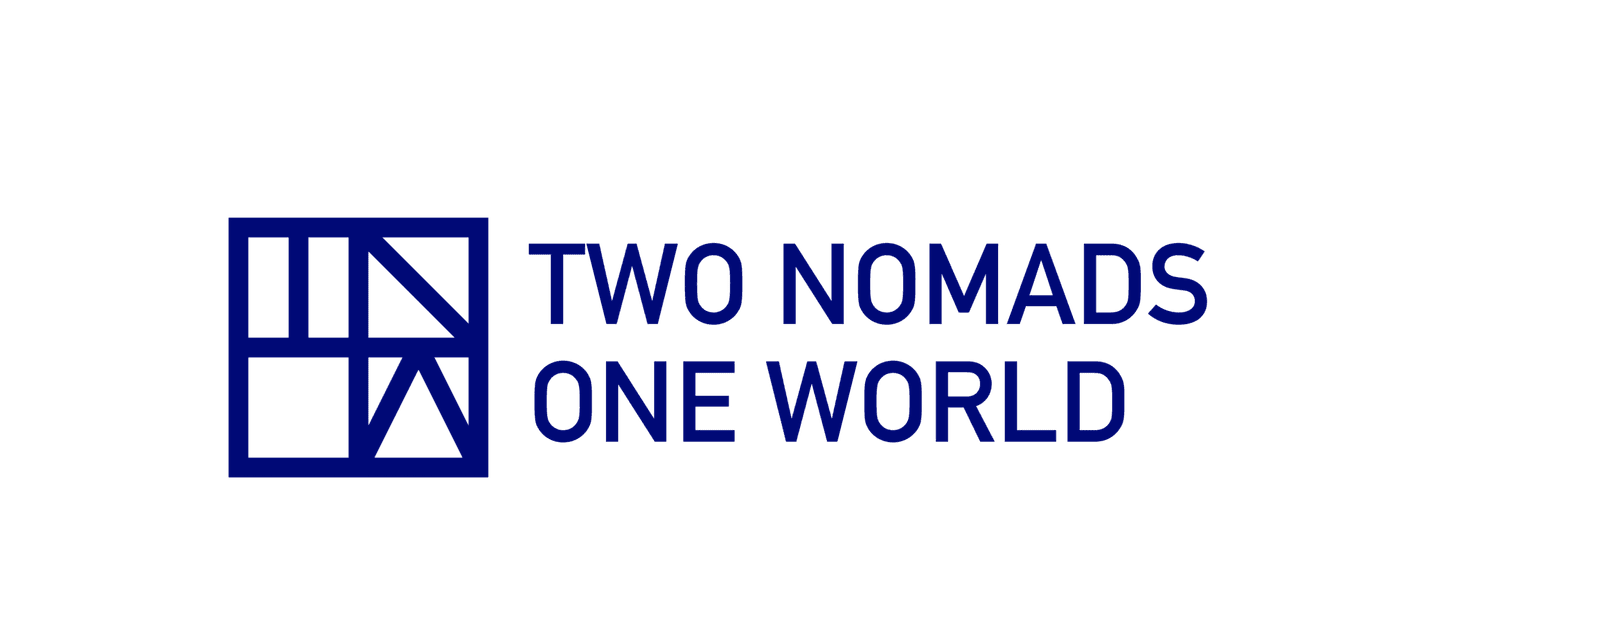 Two Nomads One World | Canada trip | Two Nomads One World